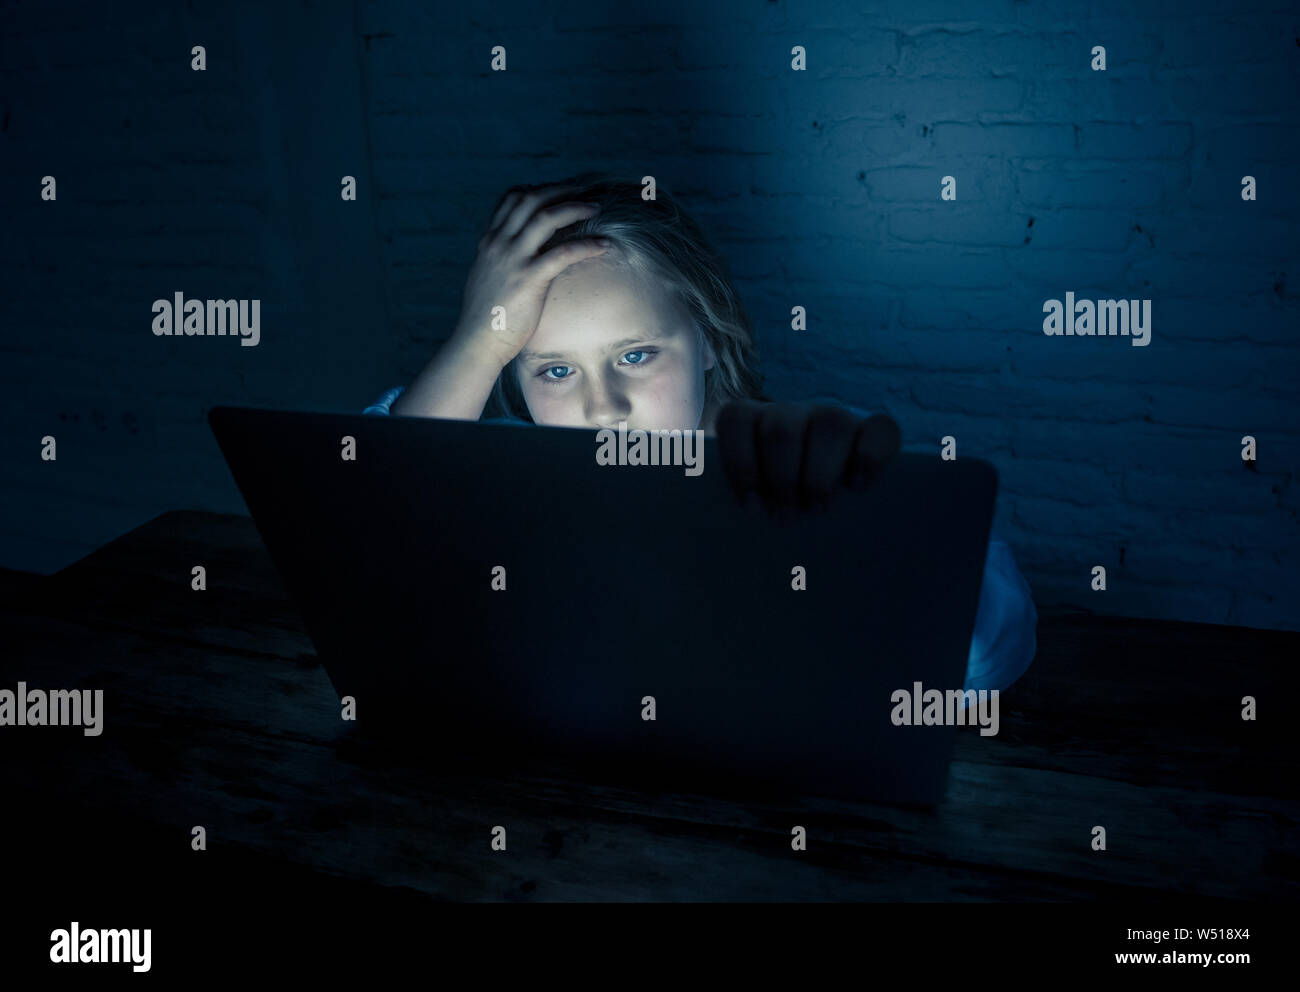 Scared sad girl bullied on line with laptop suffering cyber bullying harassment feeling desperate and intimidated. Child victim of bullying stalker so Stock Photo